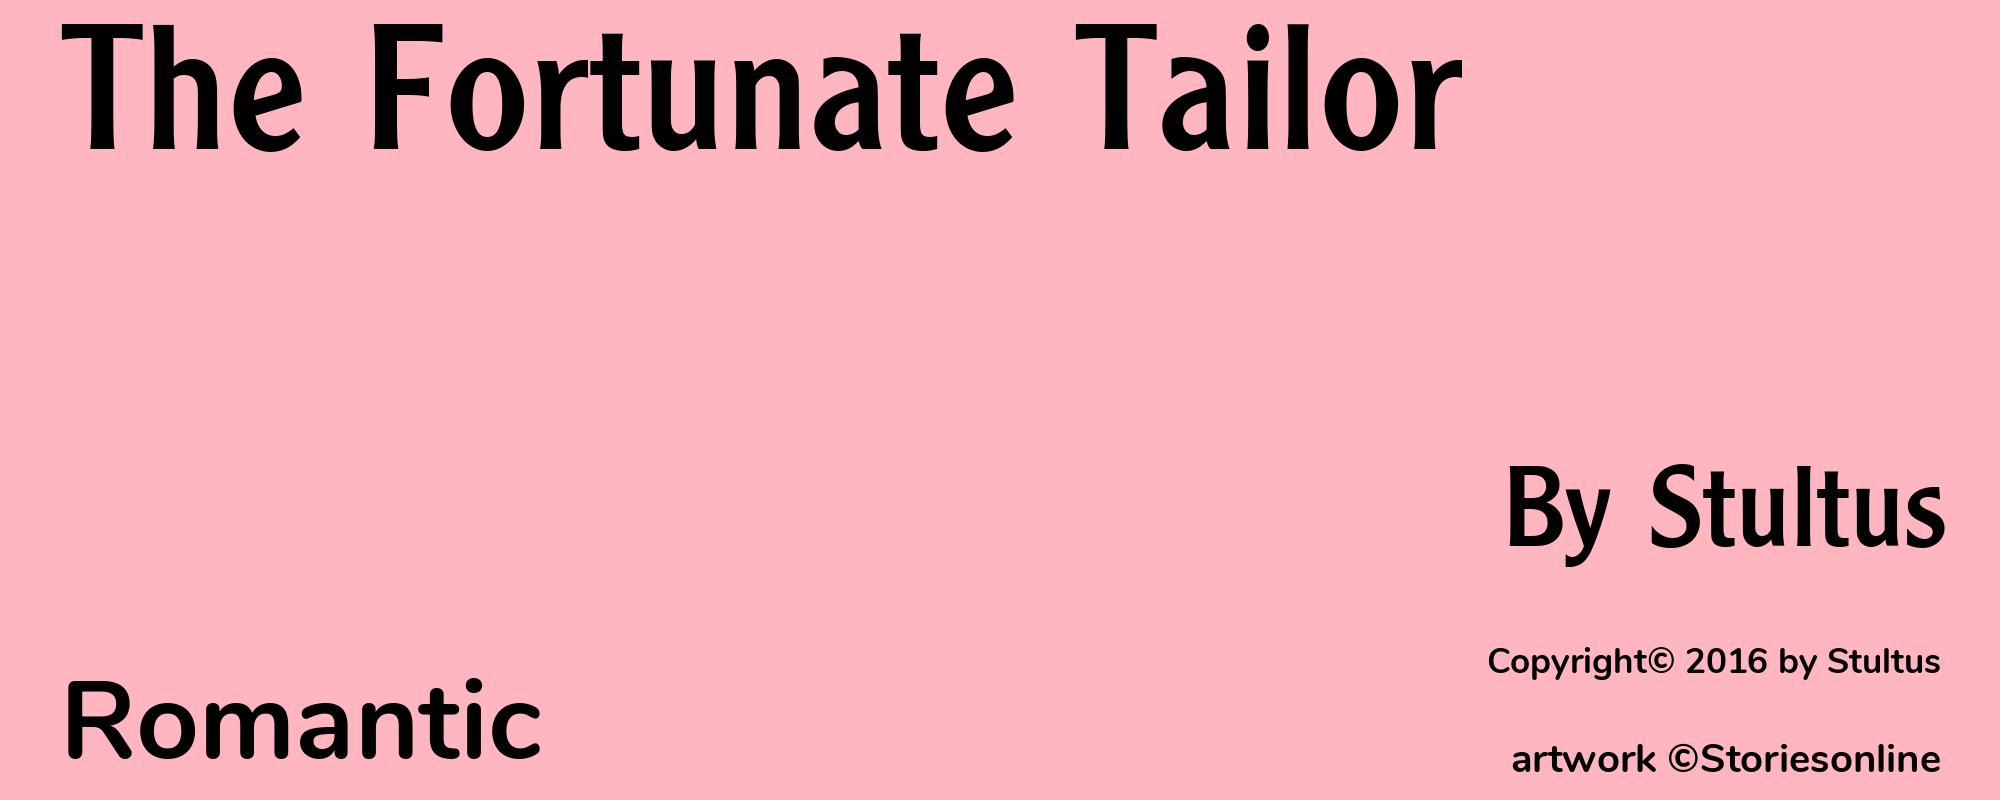 The Fortunate Tailor - Cover